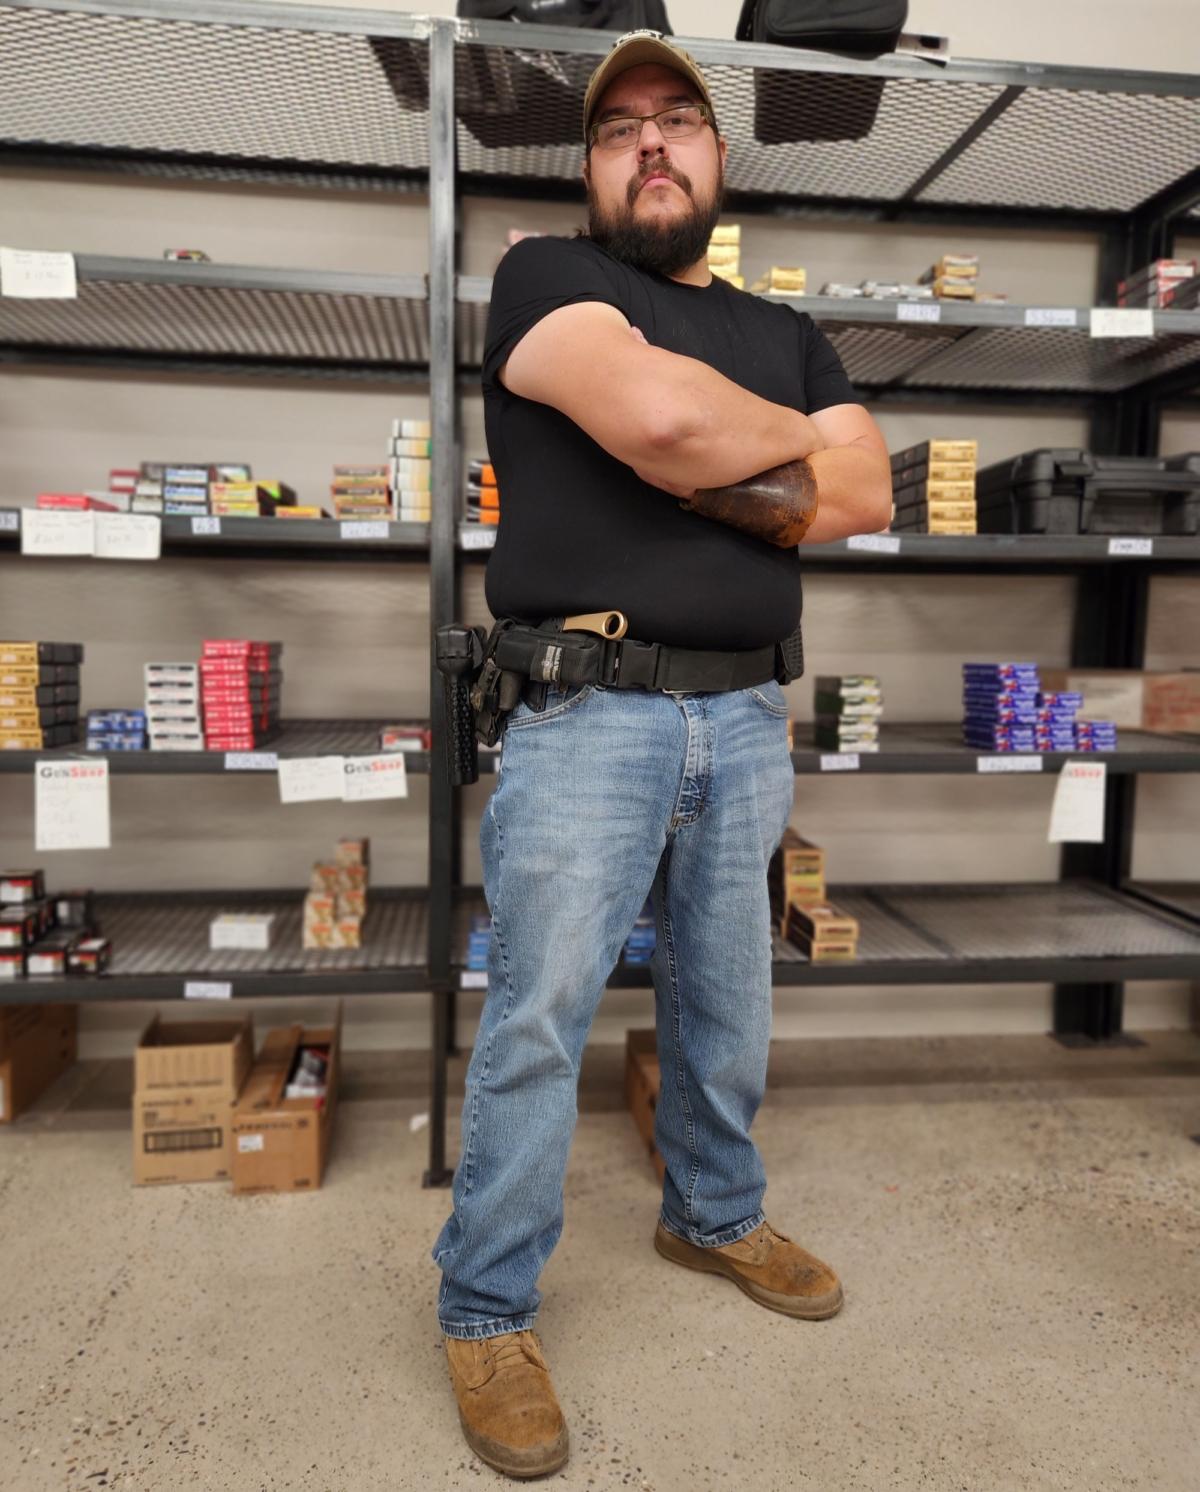 Luke Saiz of Albuquerque, N.M., holstering a Glock 9mm semi-autoamtic handgun, said he will continue carrying firearms in public in defiance of a public health order by New Mexico Gov. Michelle Lujan Grisham. Photo taken on Sept. 12, 2023. (Allan Stein/The Epoch Times)